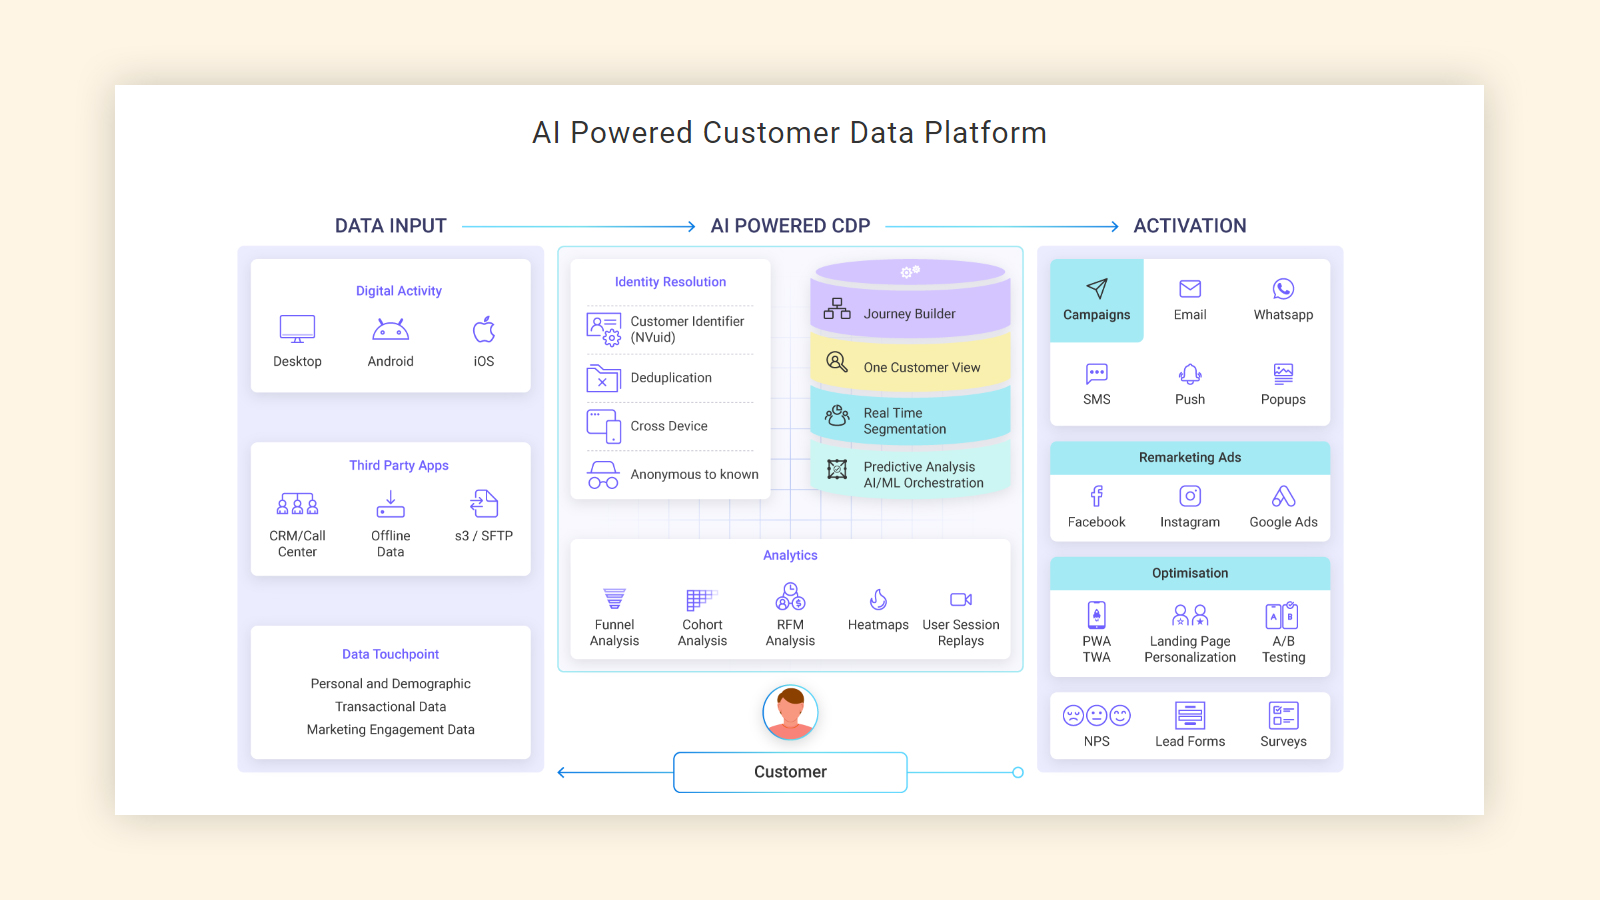 NotifyVisitors leverages AI to unify customer data from various sources, providing a 360-degree customer view for personalized marketing across channels.
